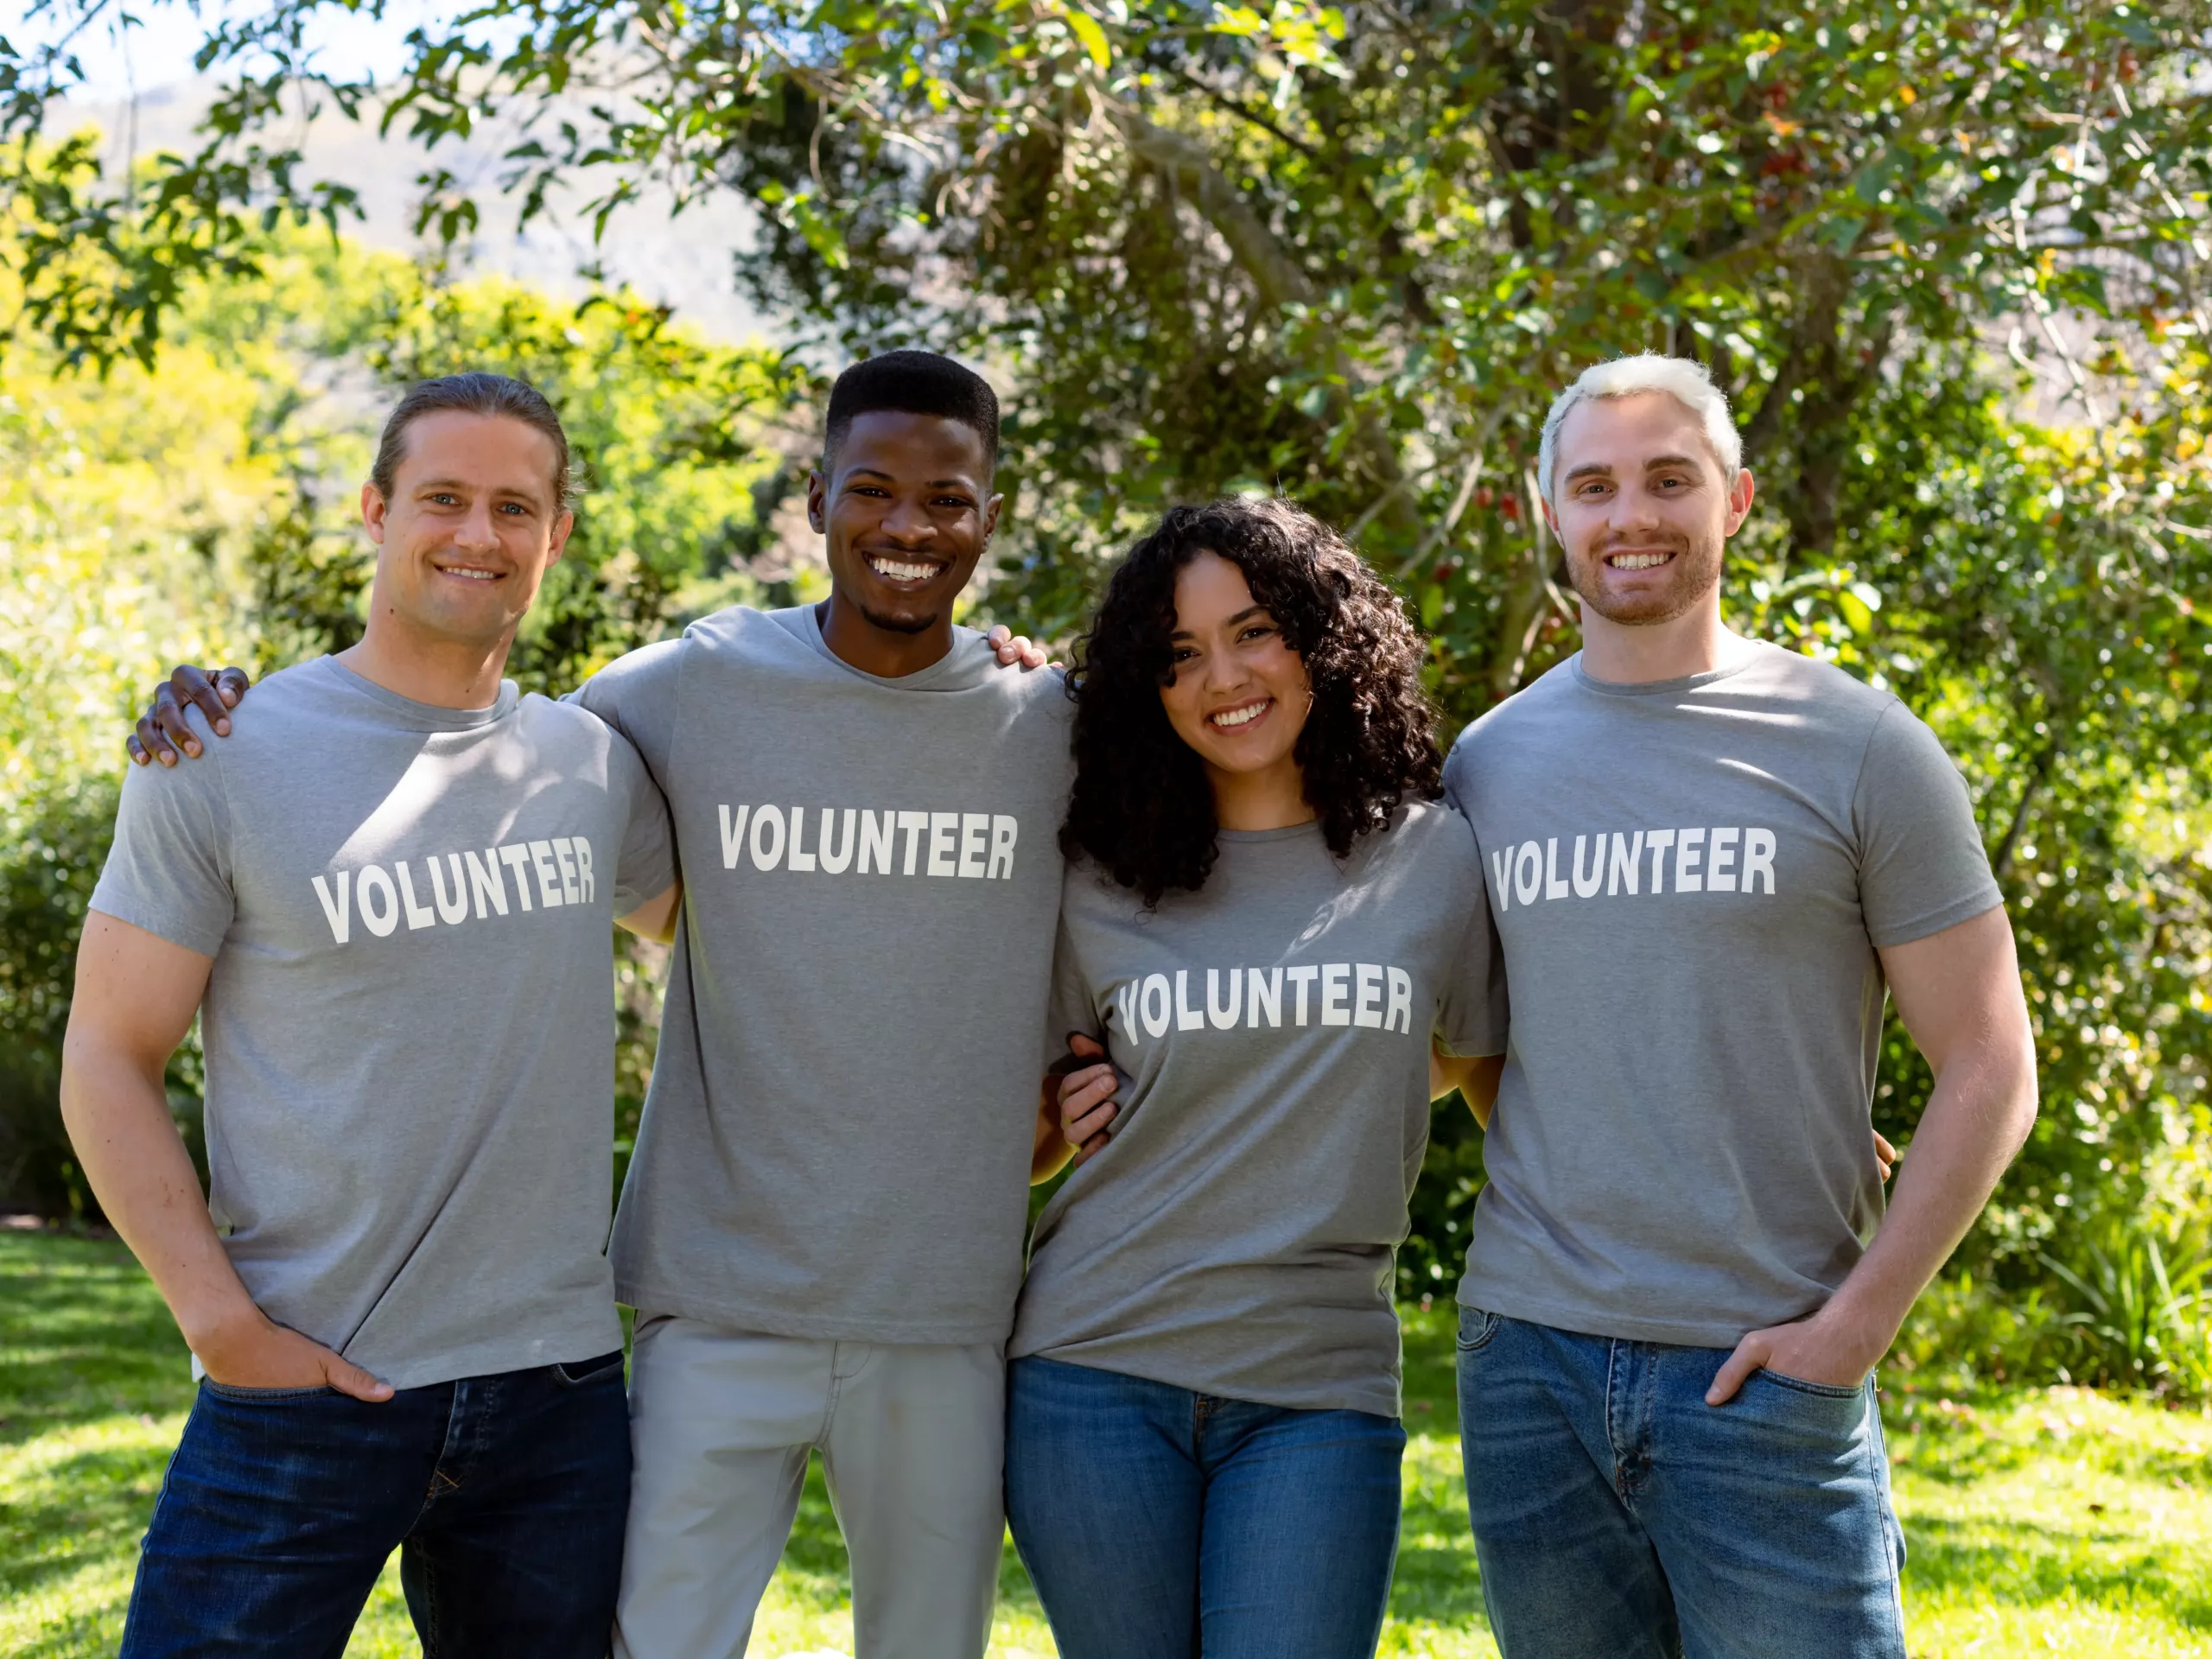 5 Ways to Find the Right Volunteer Opportunity For You